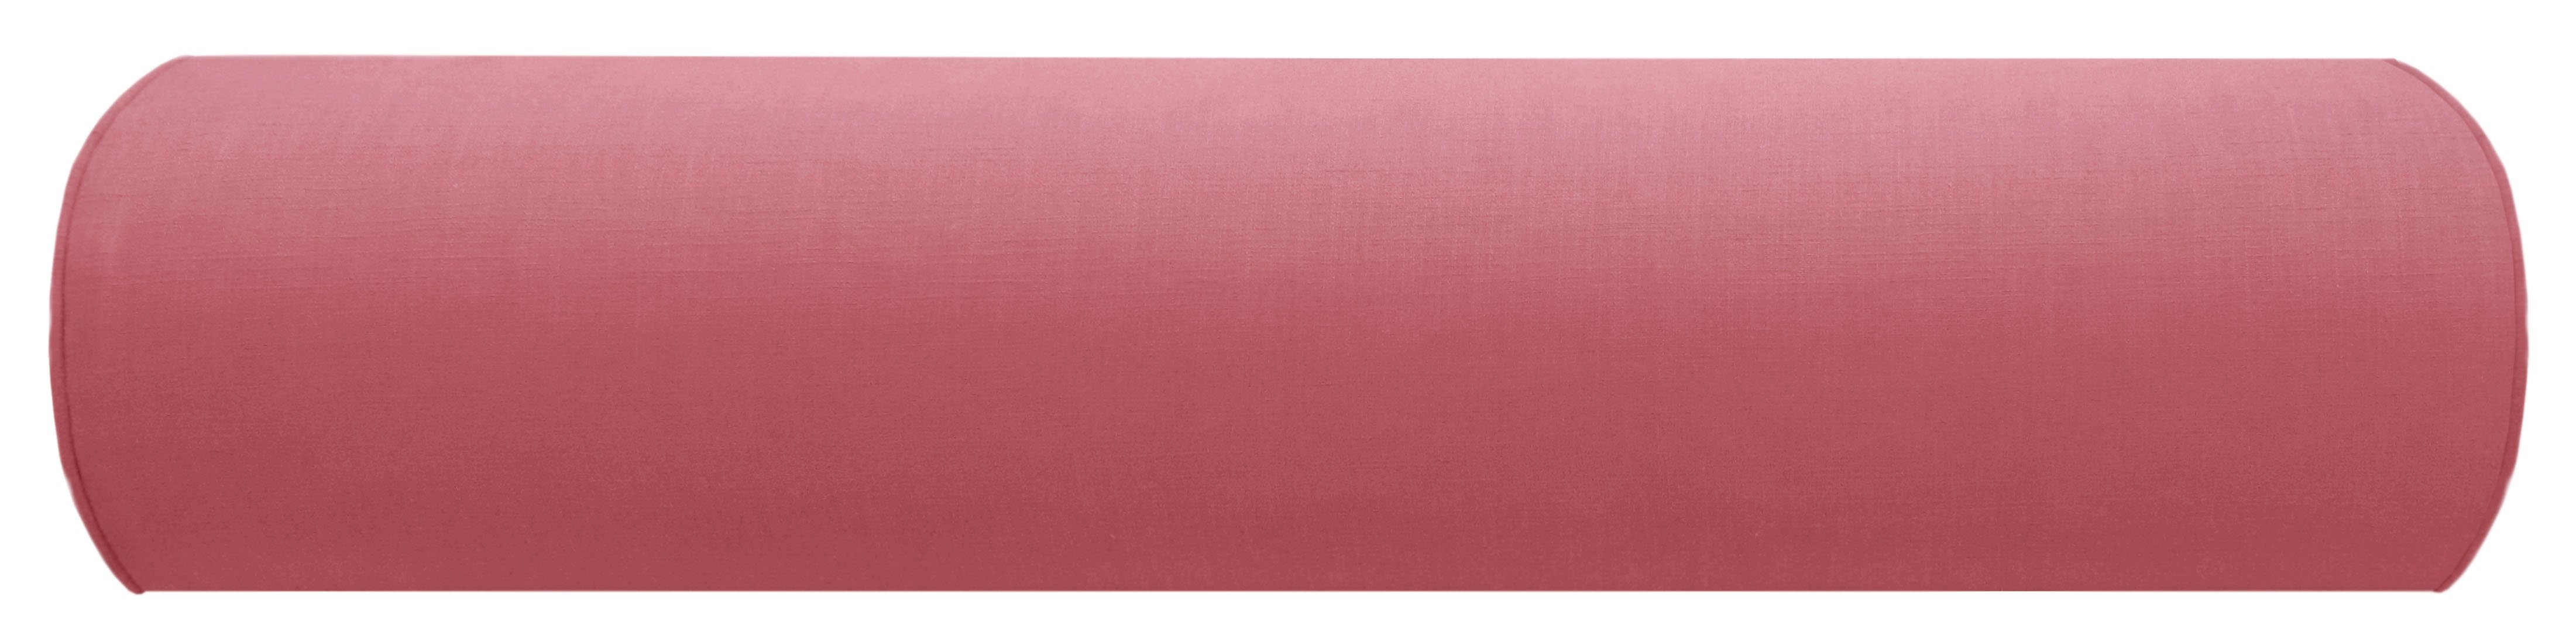 The Bolster :: Classic Linen // Rosé Pink (new) - KING // 9" X 48" - Image 1